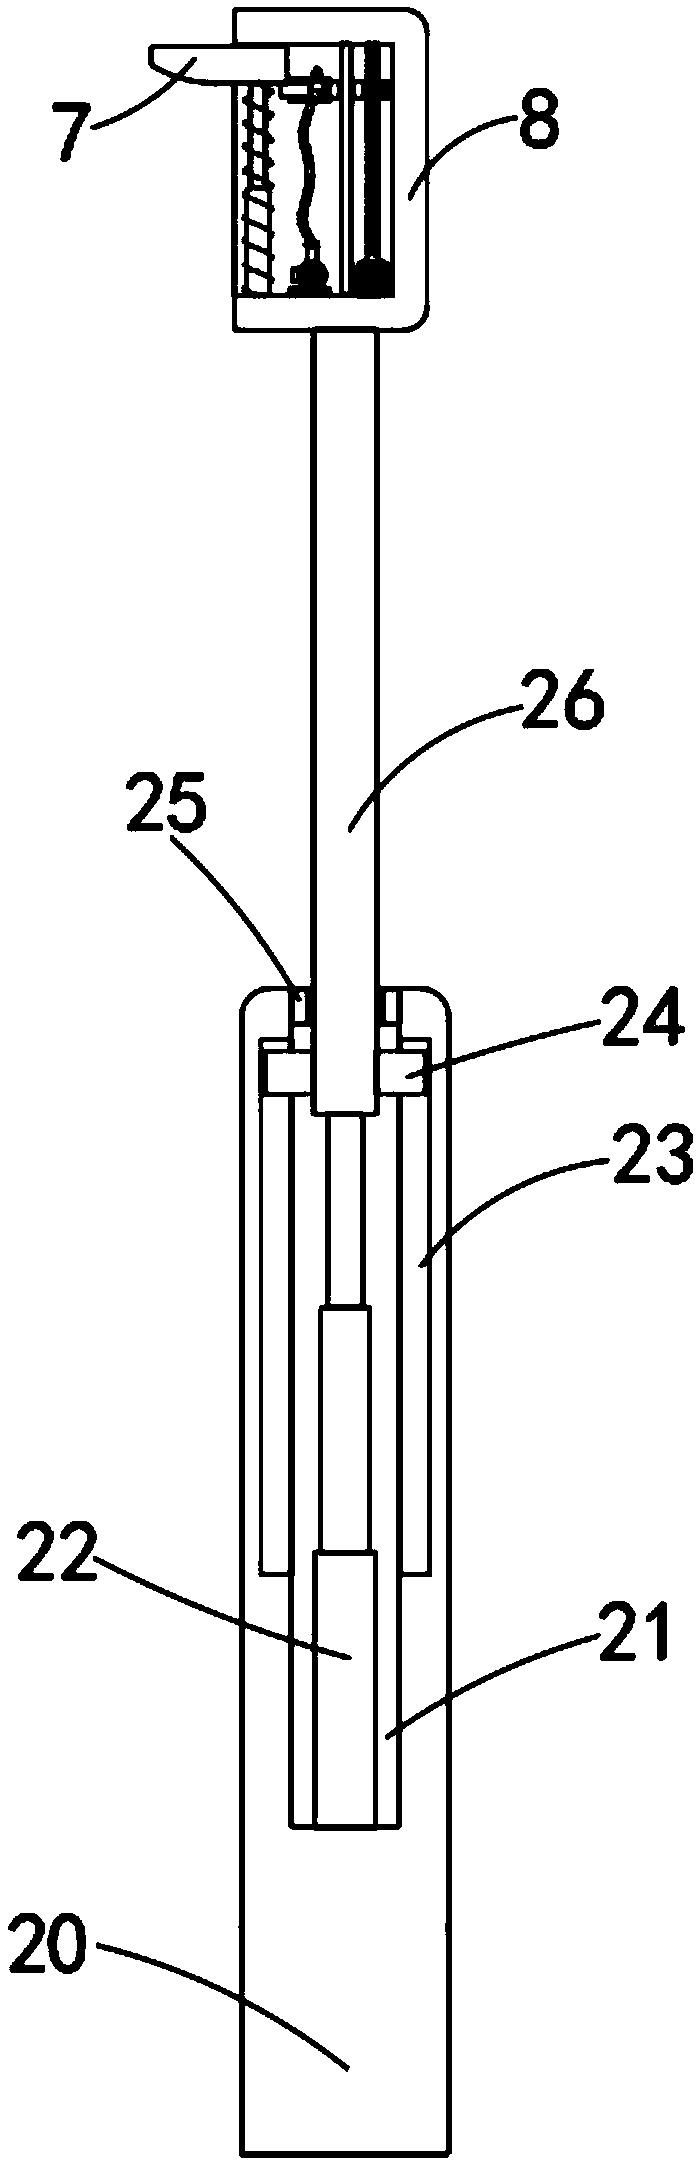 Auxiliary force augment hammer mechanism for power system operating rod